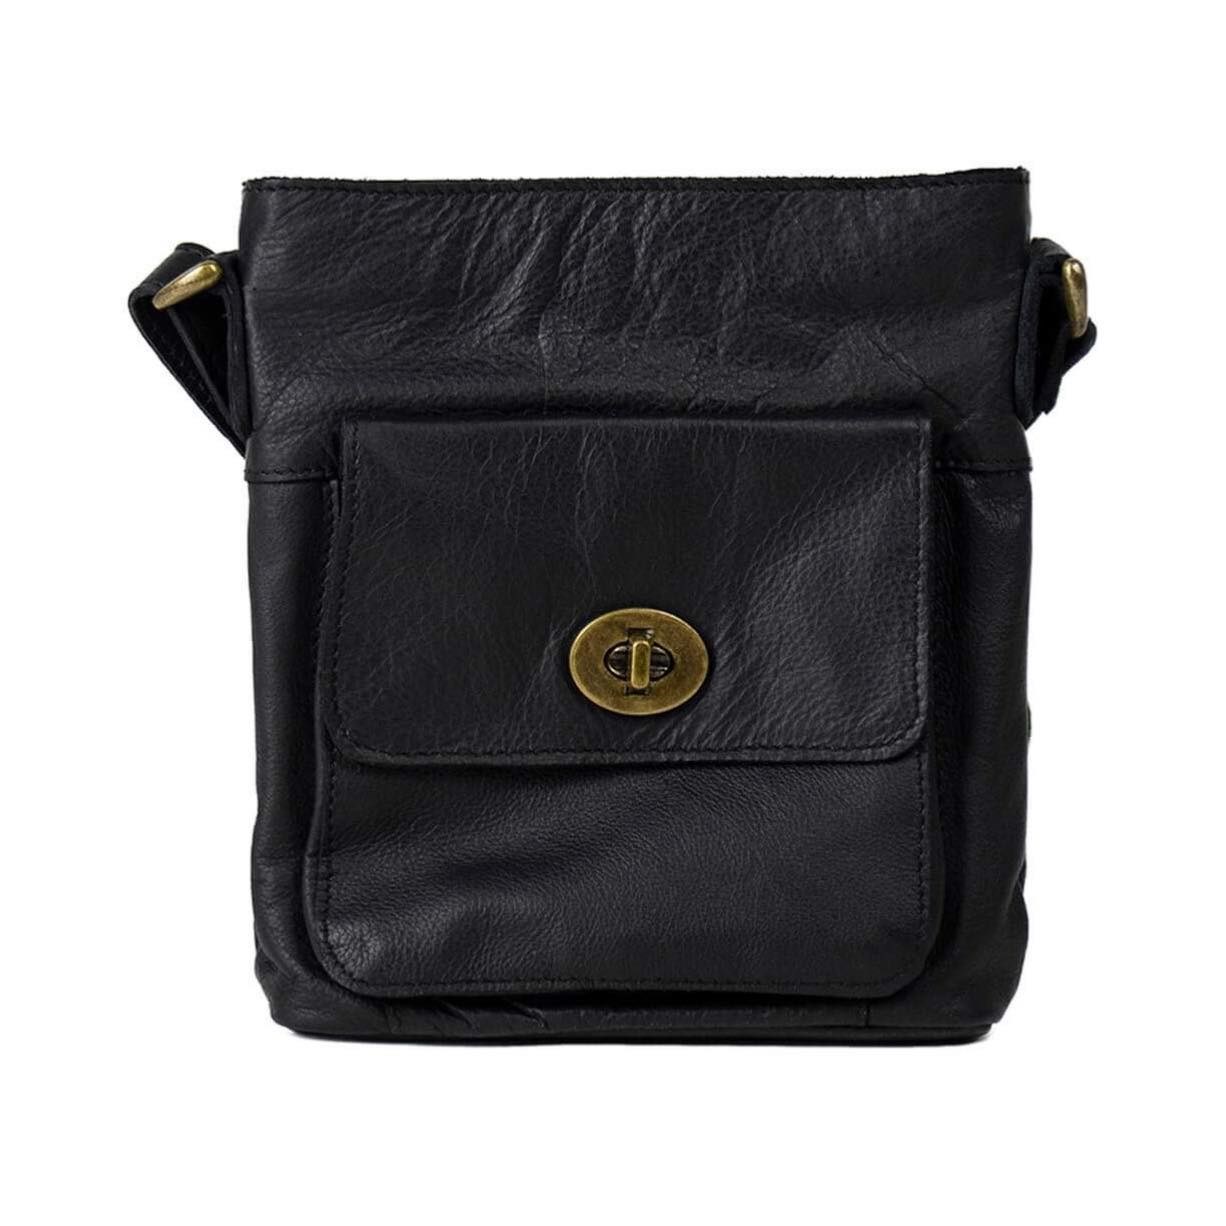 Re:Designed by Kay Small Bag Black